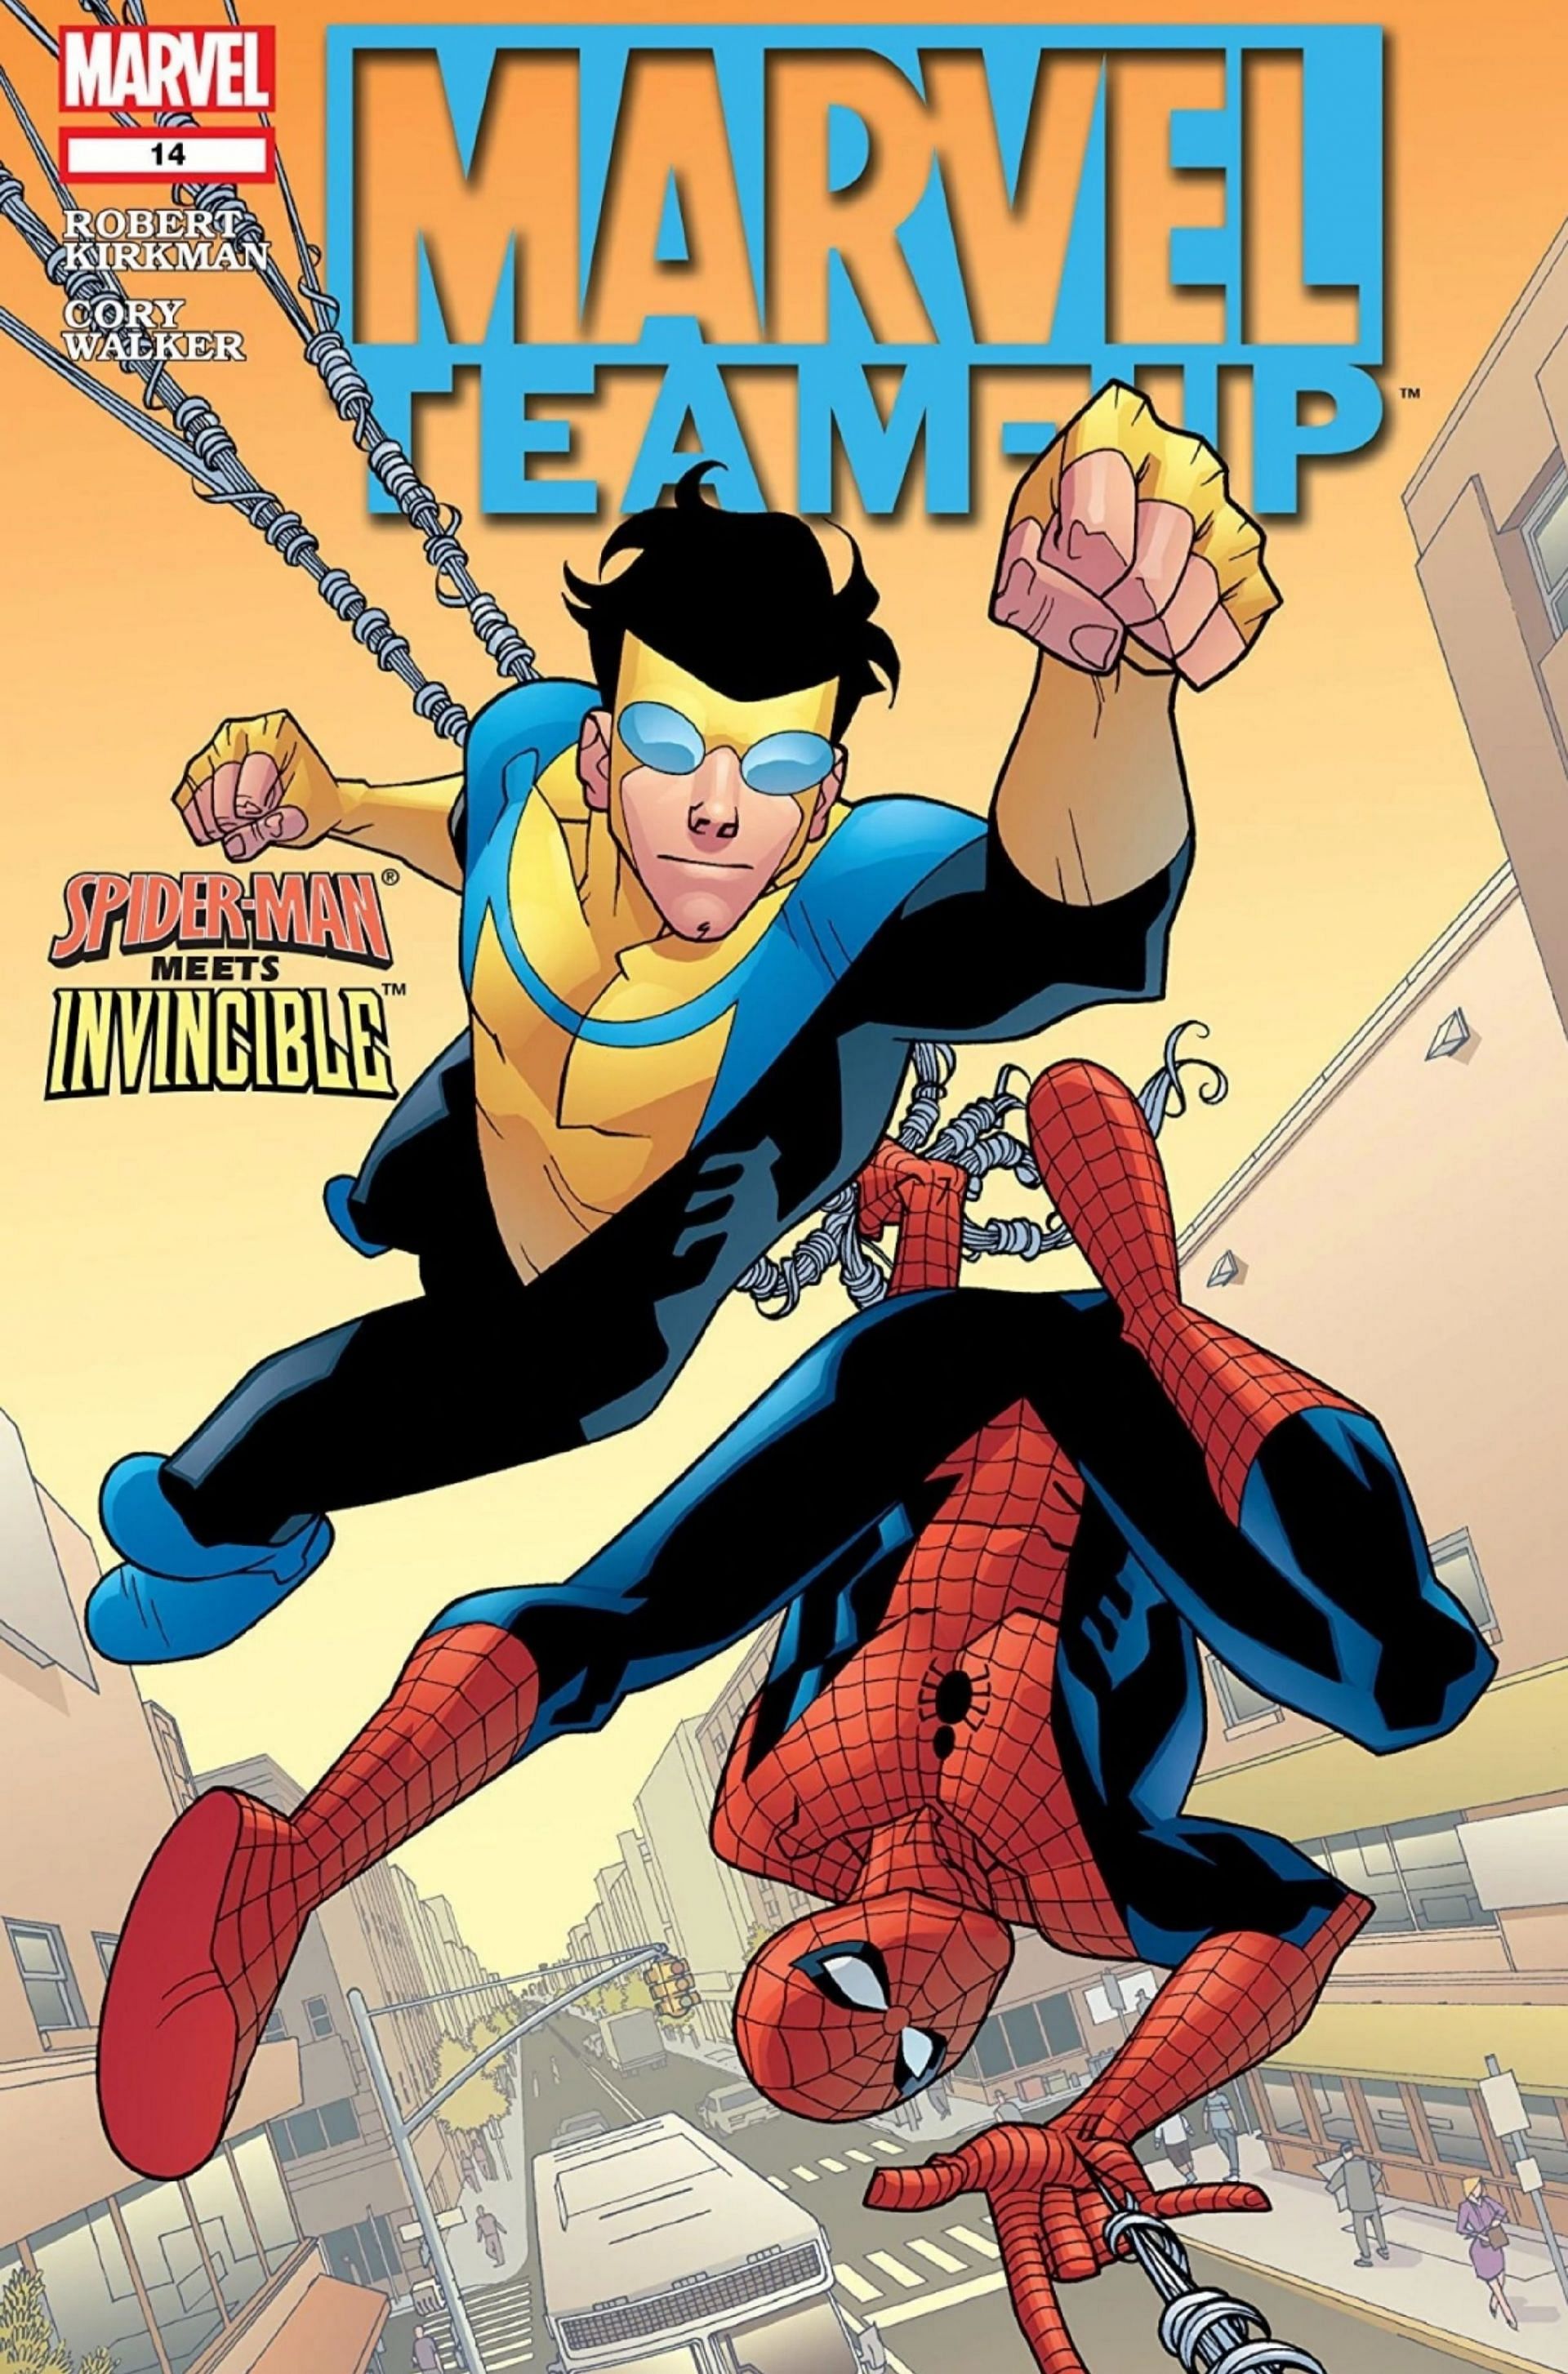 Invincible and Spider-Man on the cover of Marvel Team-Up #14 (Image via Marvel Comics)